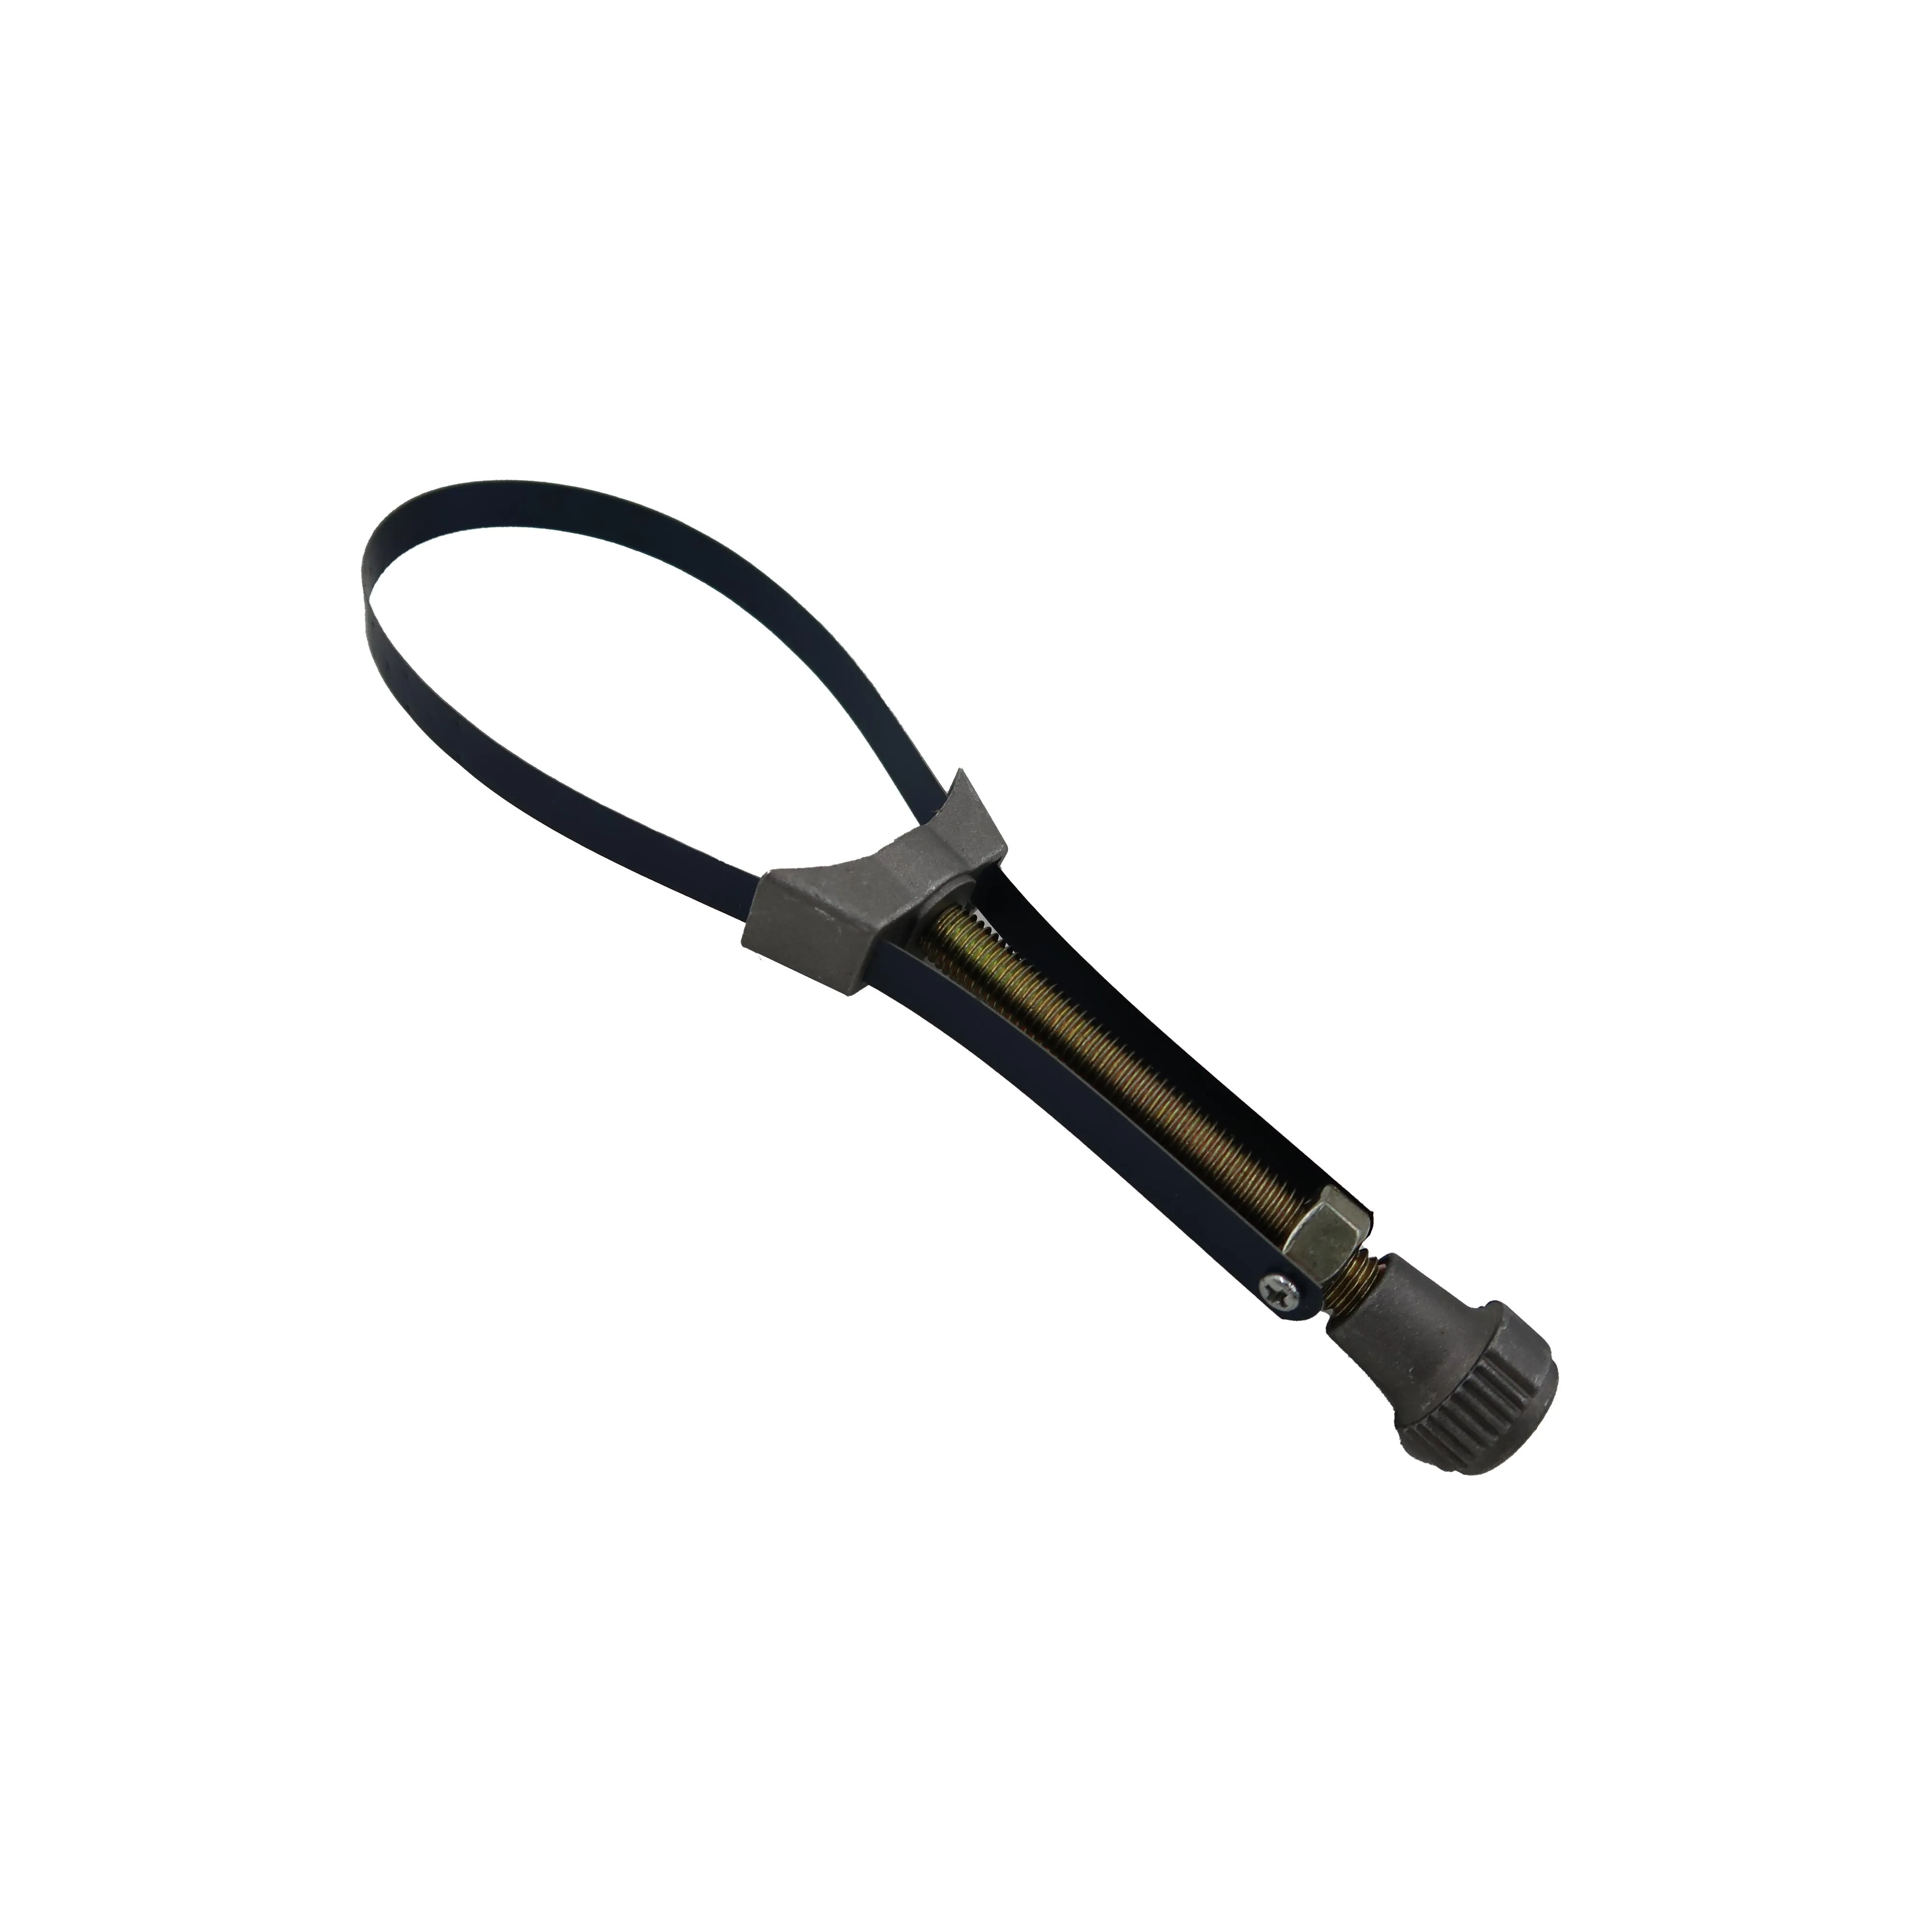 OIL FILTER WRENCH BAND TYPE 105-155MM REMOVES FILTER WITH MINIMAL RISK OF DAMAGE 